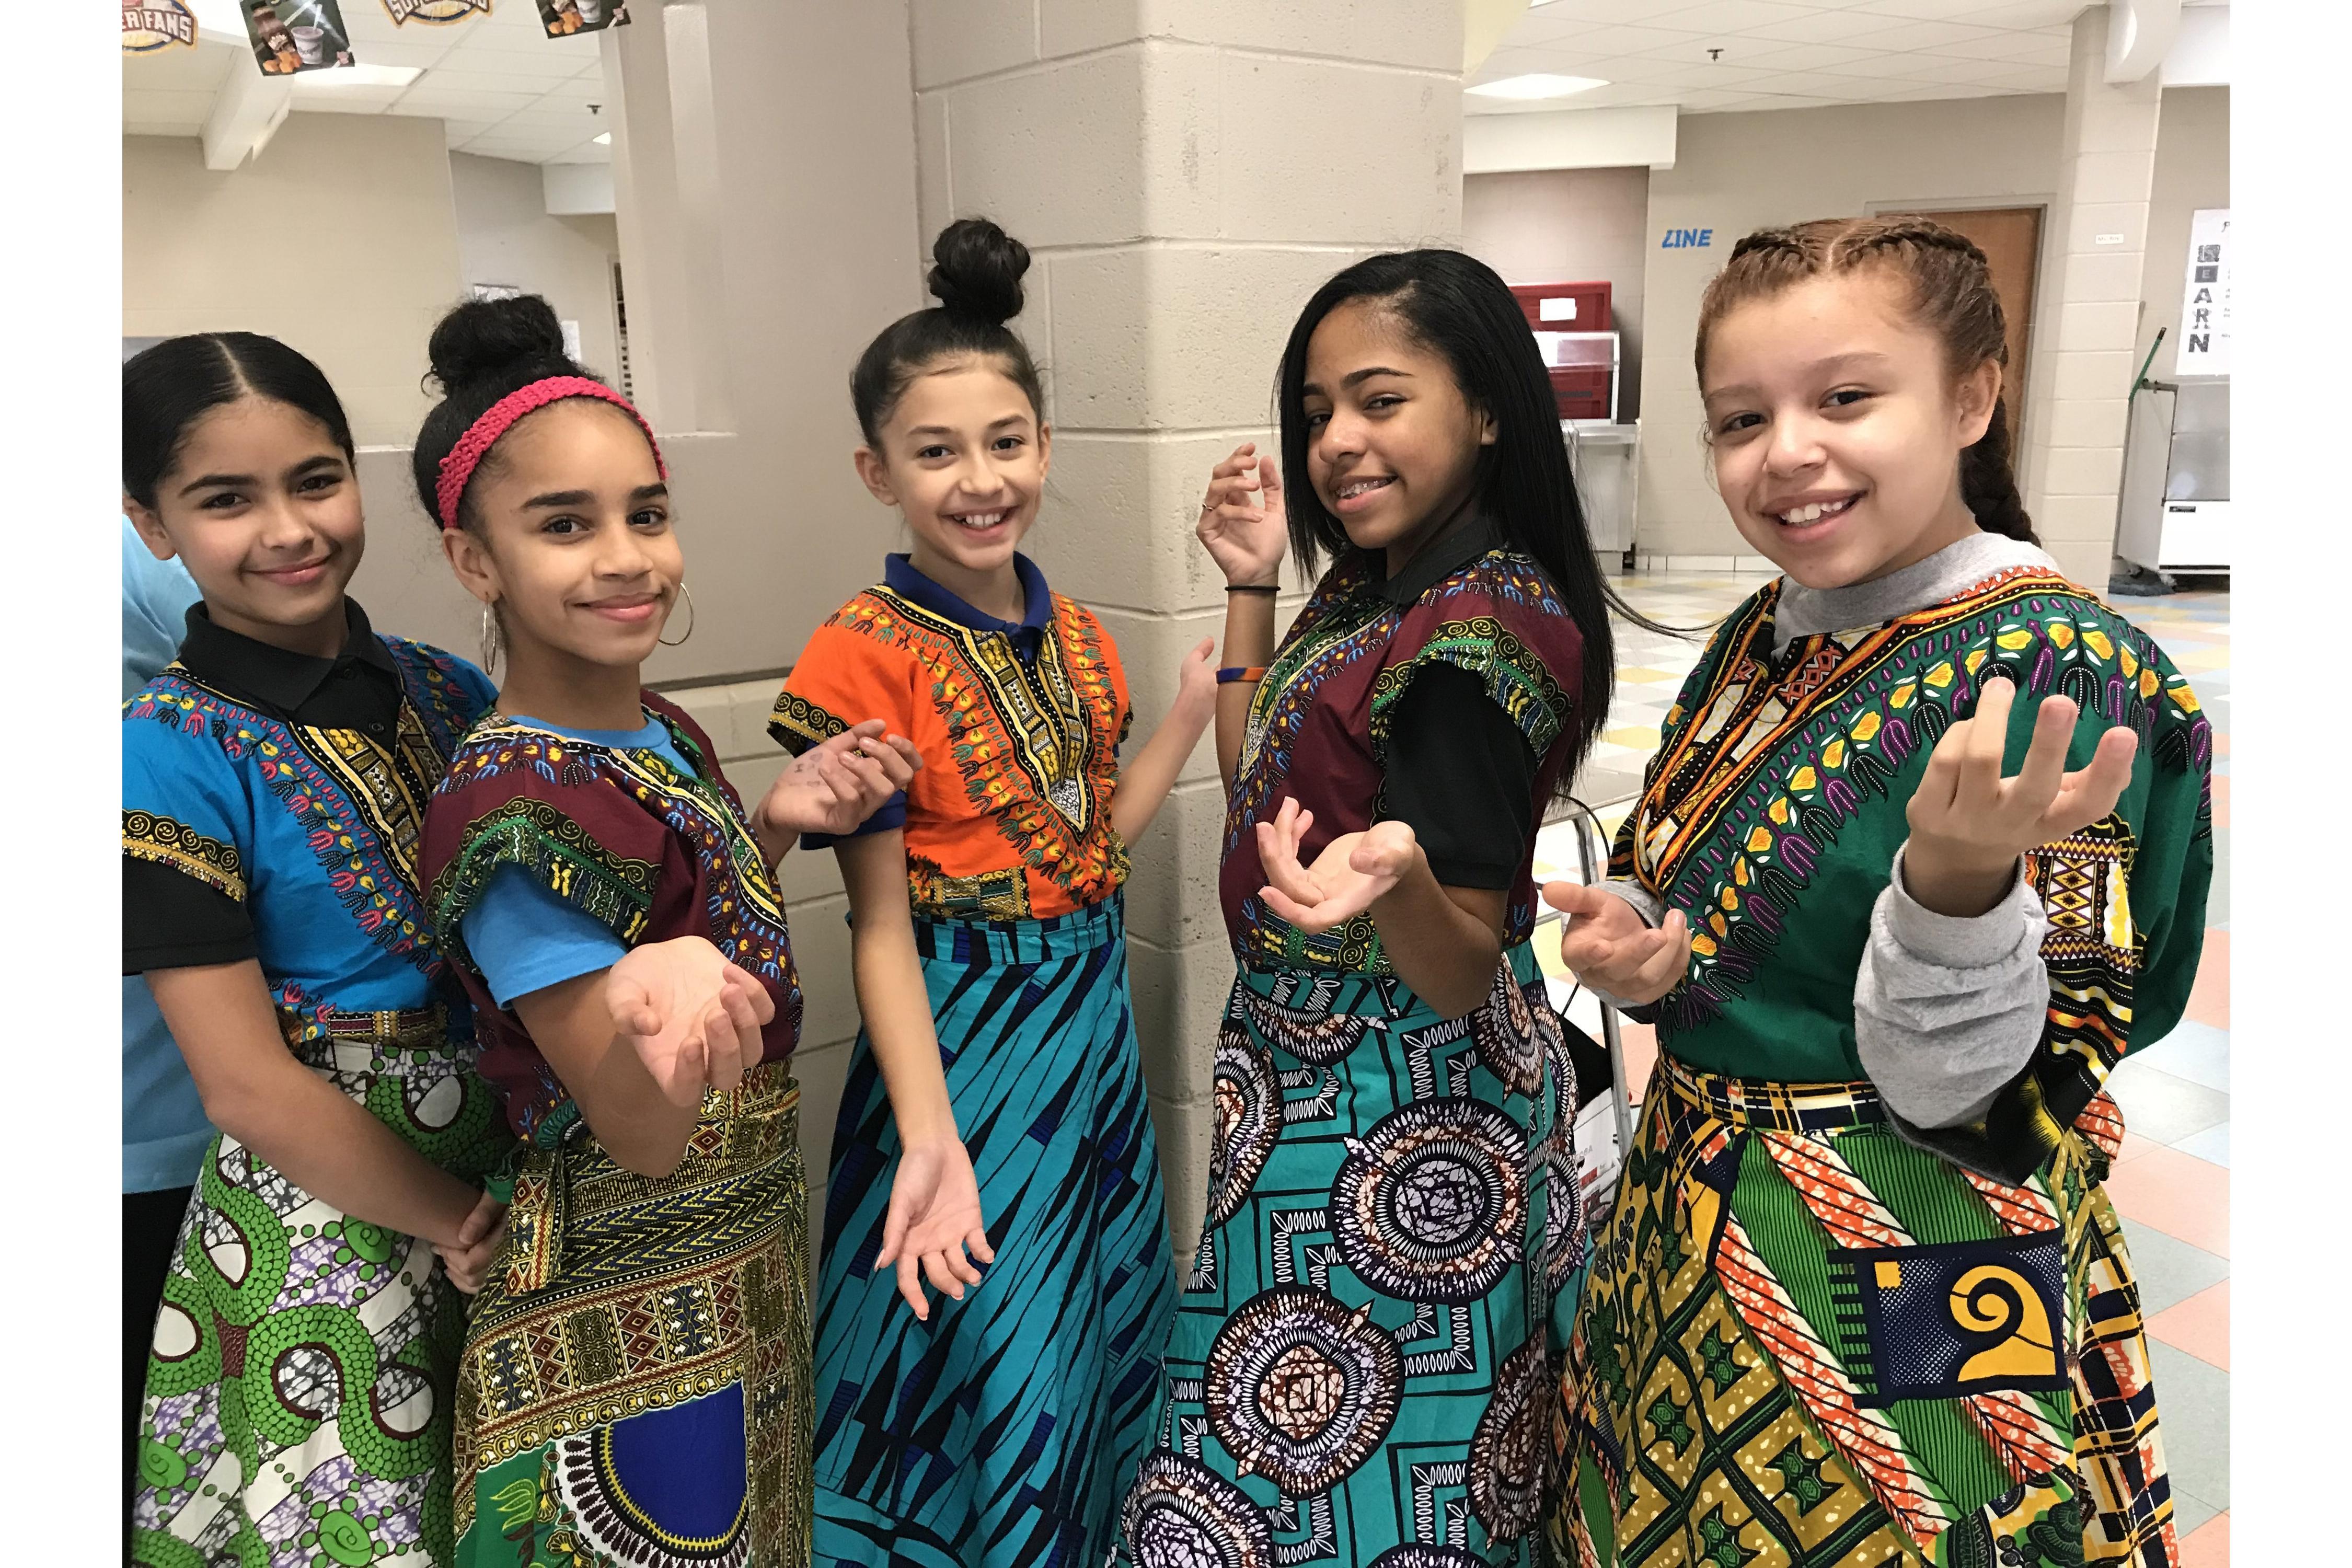 Female students in traditional dresses